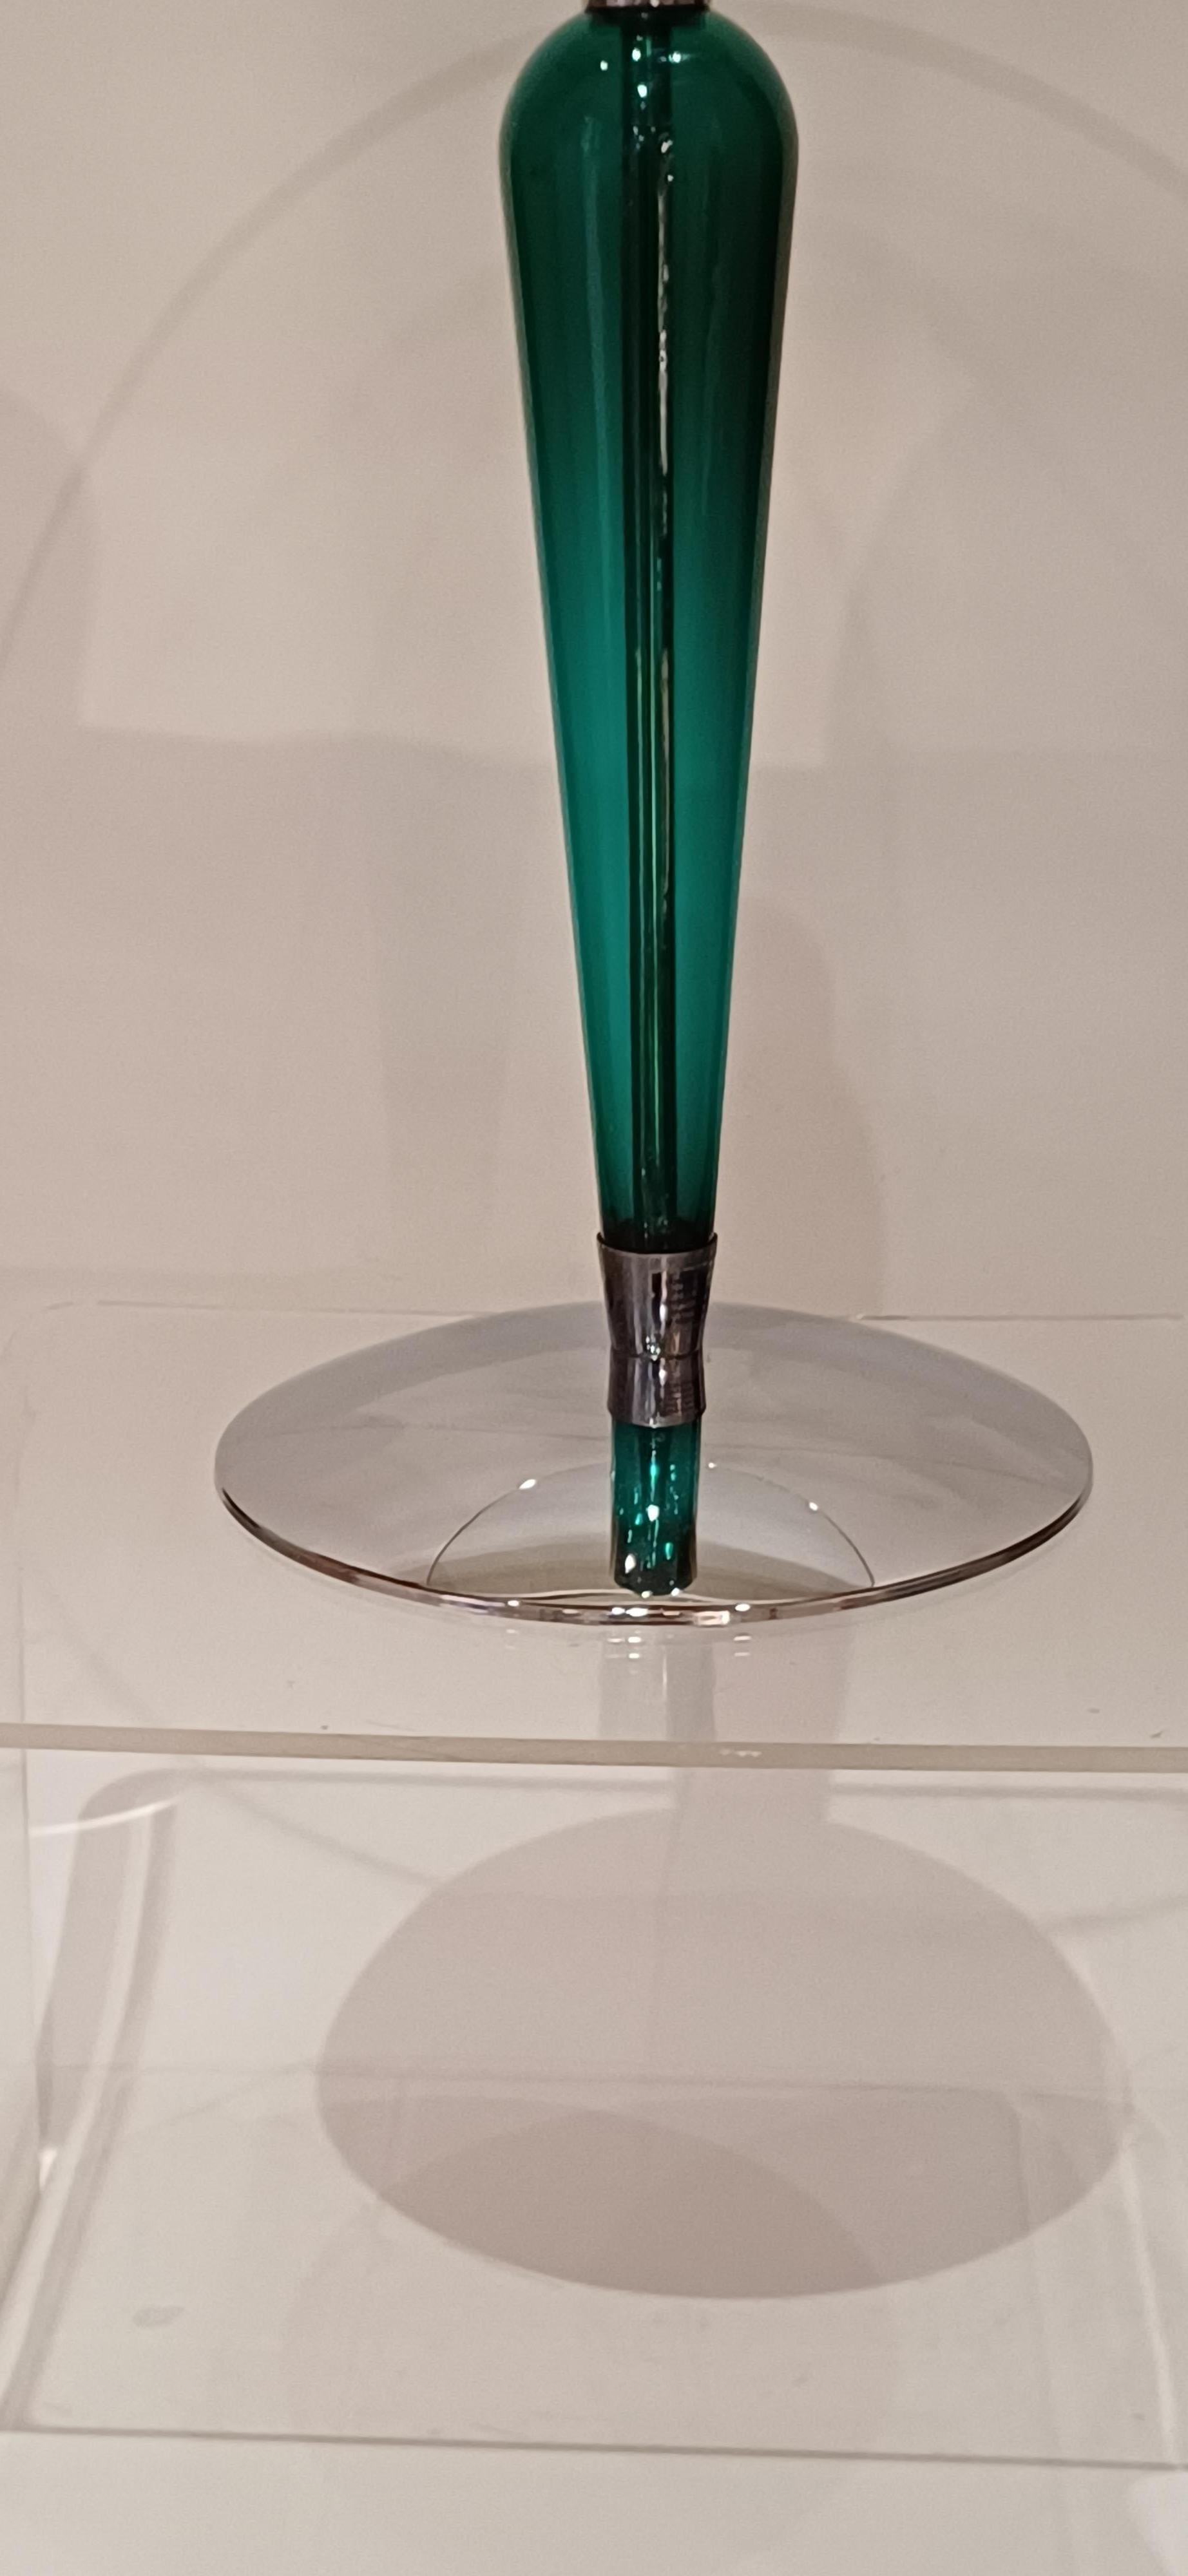 1980's murano glass side-table attributed  to Seguso.  Original  label explaining that it is hand made by the master glass bloweg and in consequence there are imperfections in the glass.